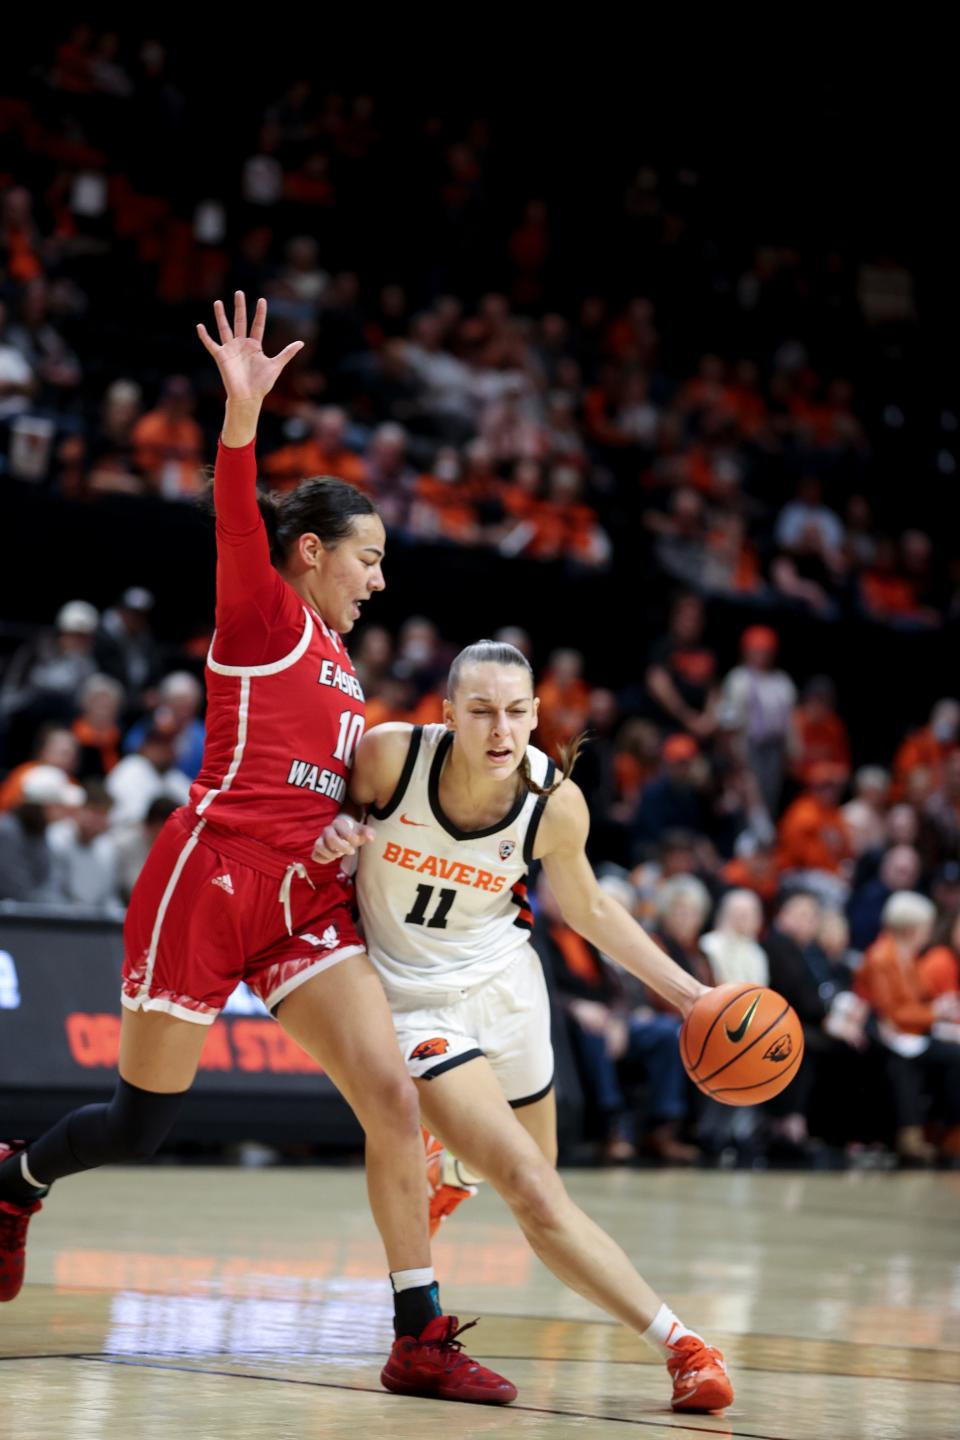 Oregon State guard AJ Marotte (11) drives to the basket against Eastern Washington guard Jacinta Buckley (10) during the first quarter at Gill Coliseum in Corvallis, Ore. on Thursday, Nov. 17, 2022.